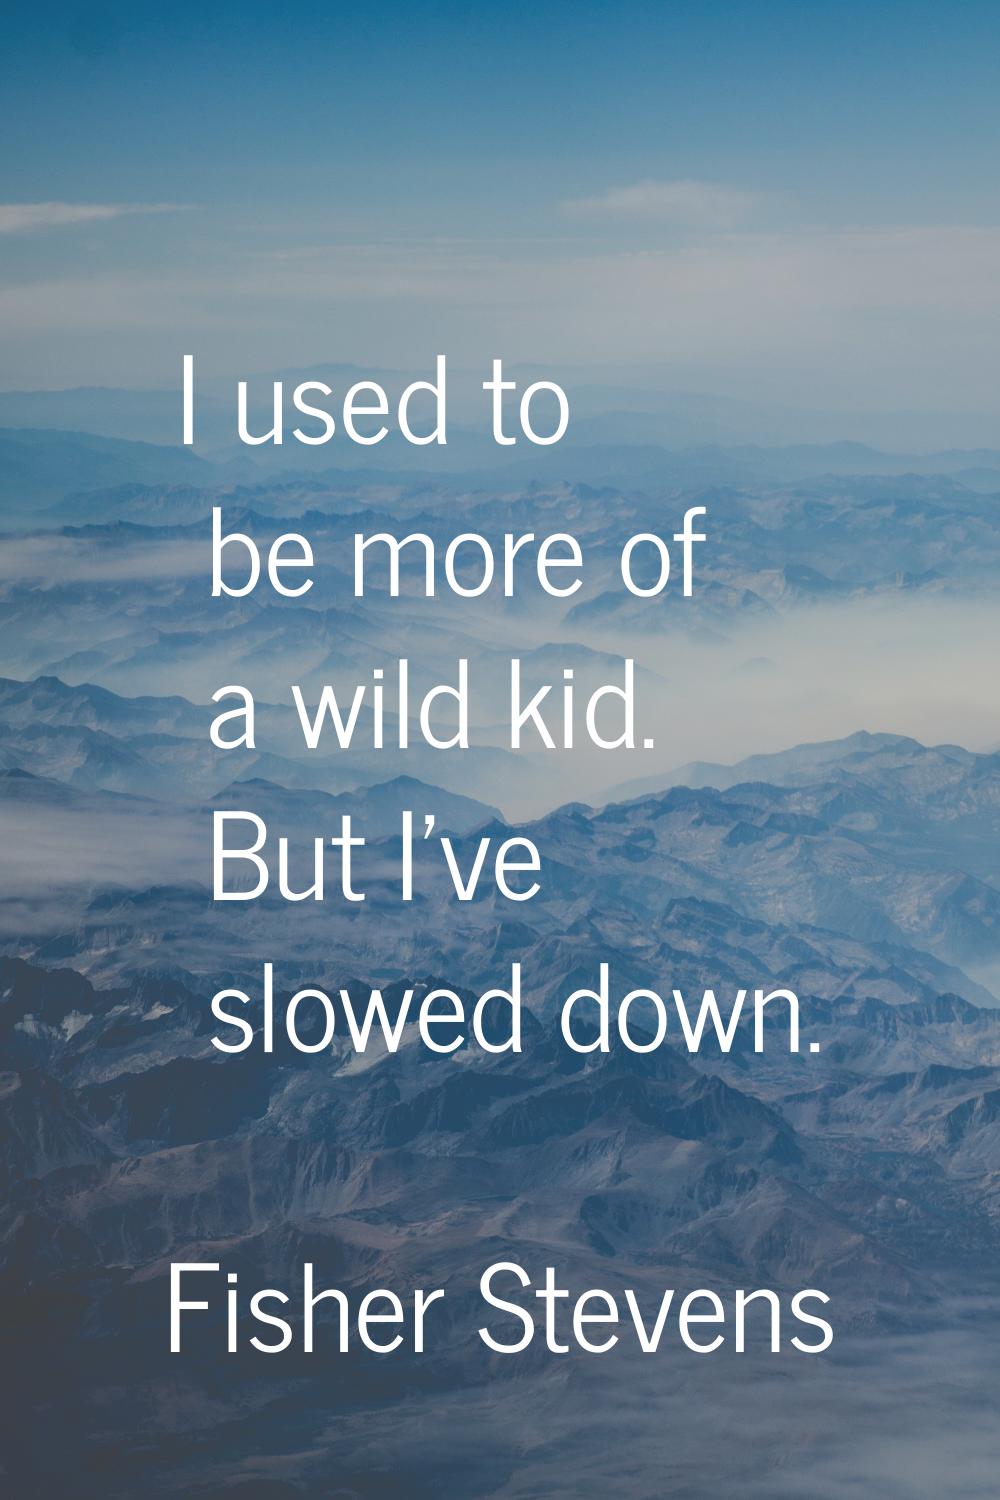 I used to be more of a wild kid. But I've slowed down.